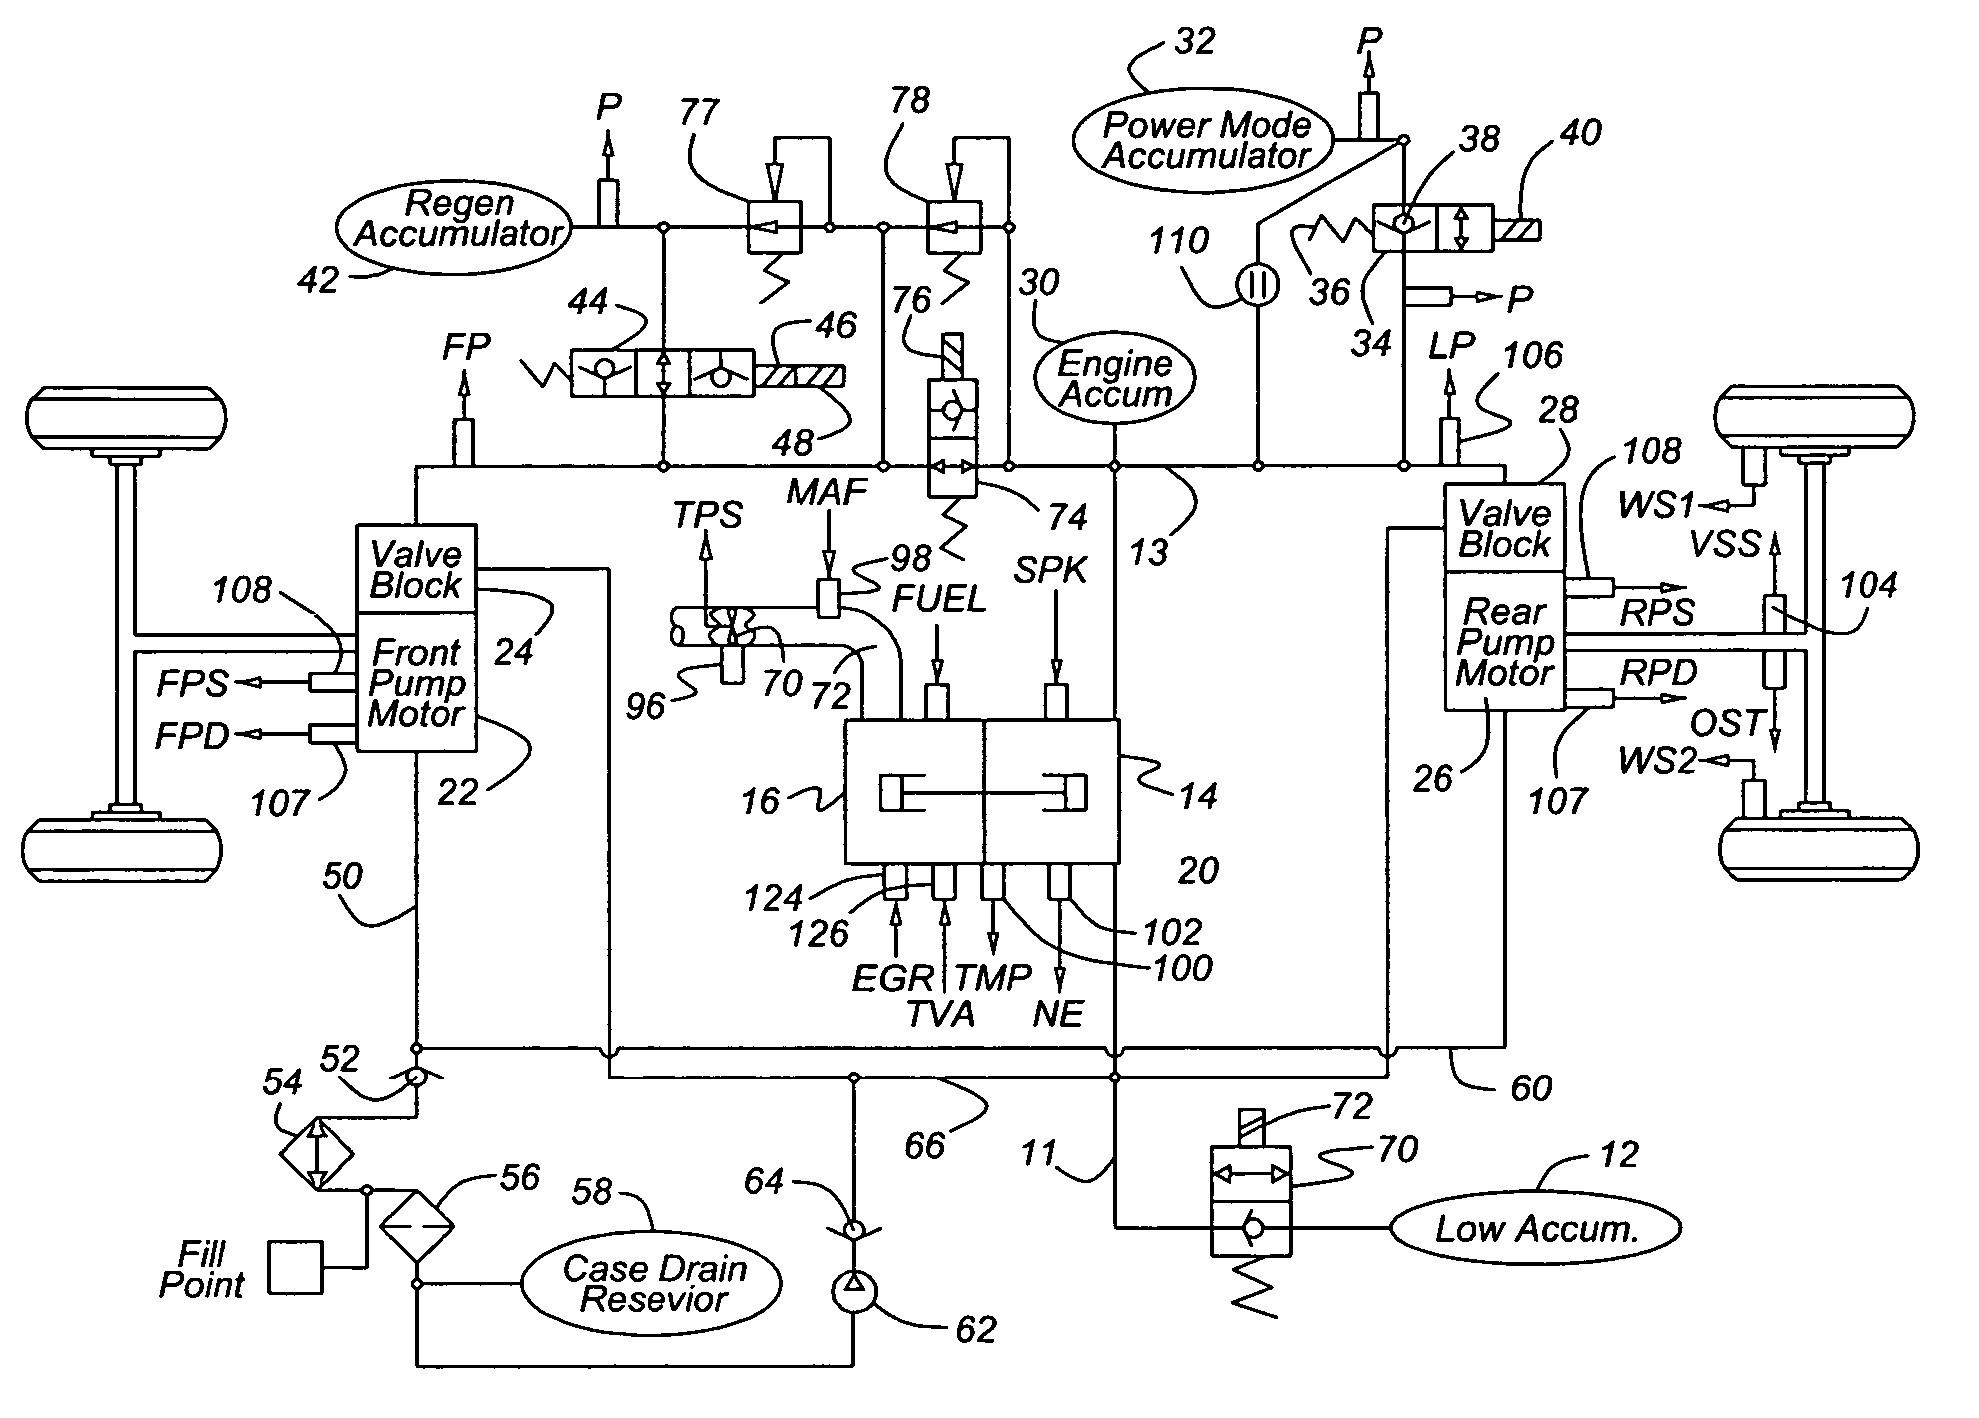 Multiple pressure mode operation for hydraulic hybrid vehicle powertrain